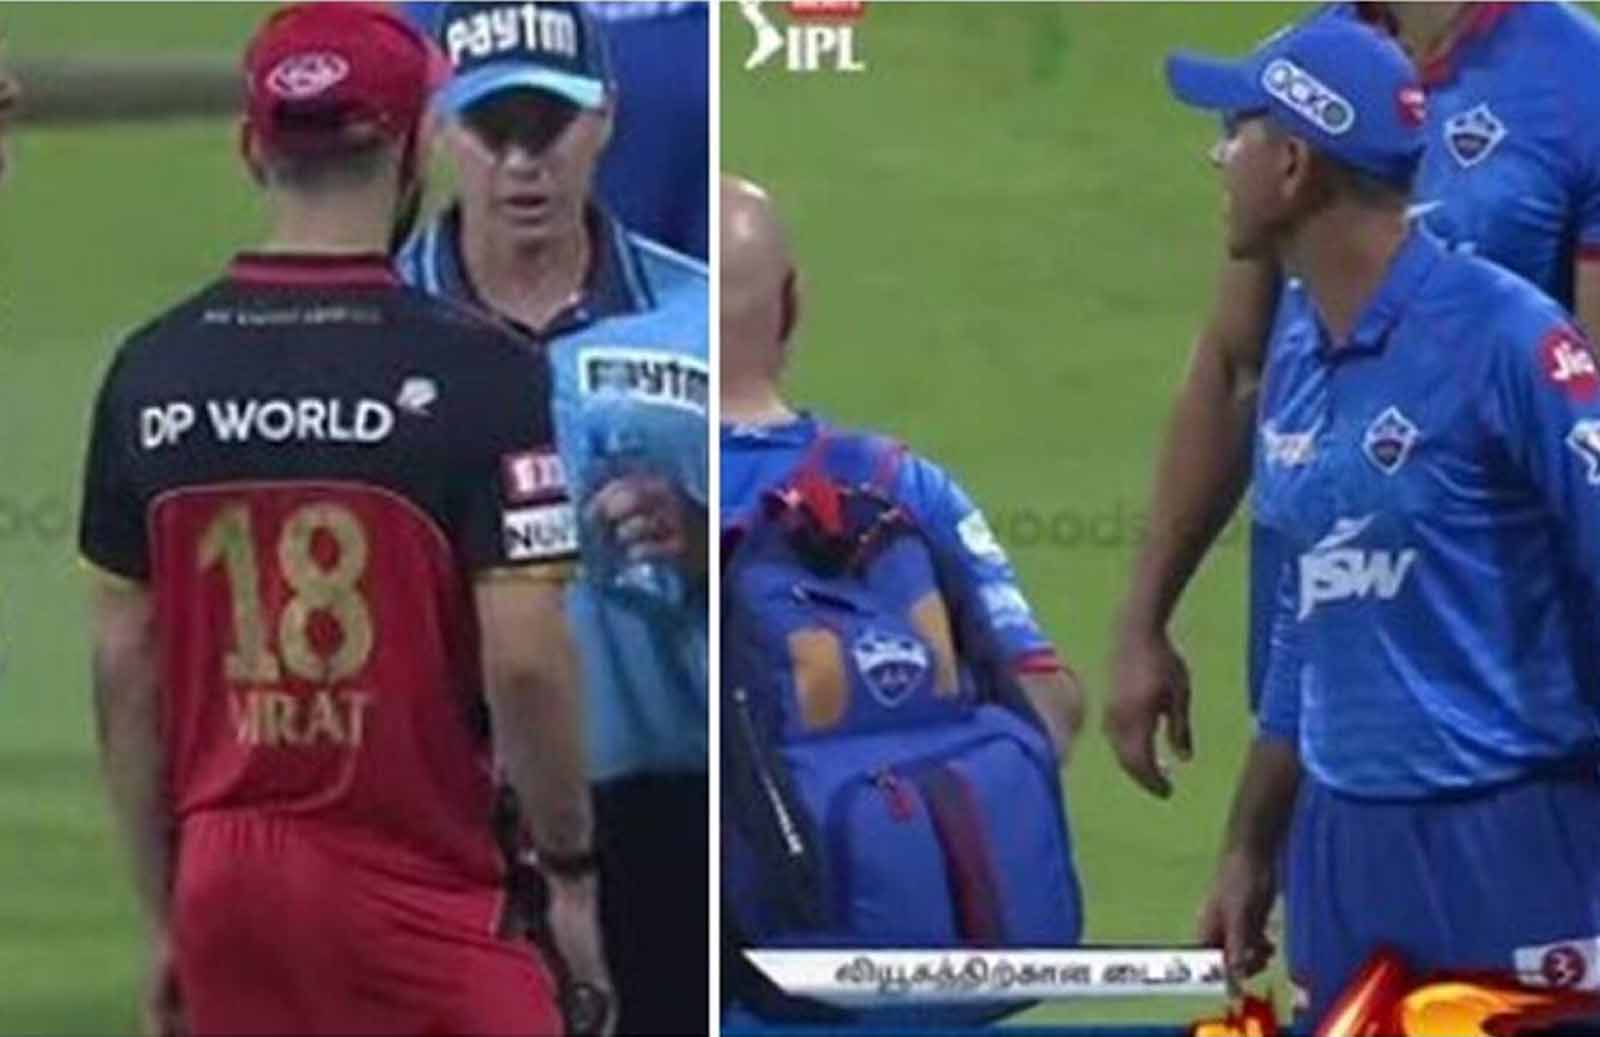 Ravi Ashwin Confirms Virat Kohli And Ricky Ponting Were Involved In Heated Altercation On Field In IPL 2020